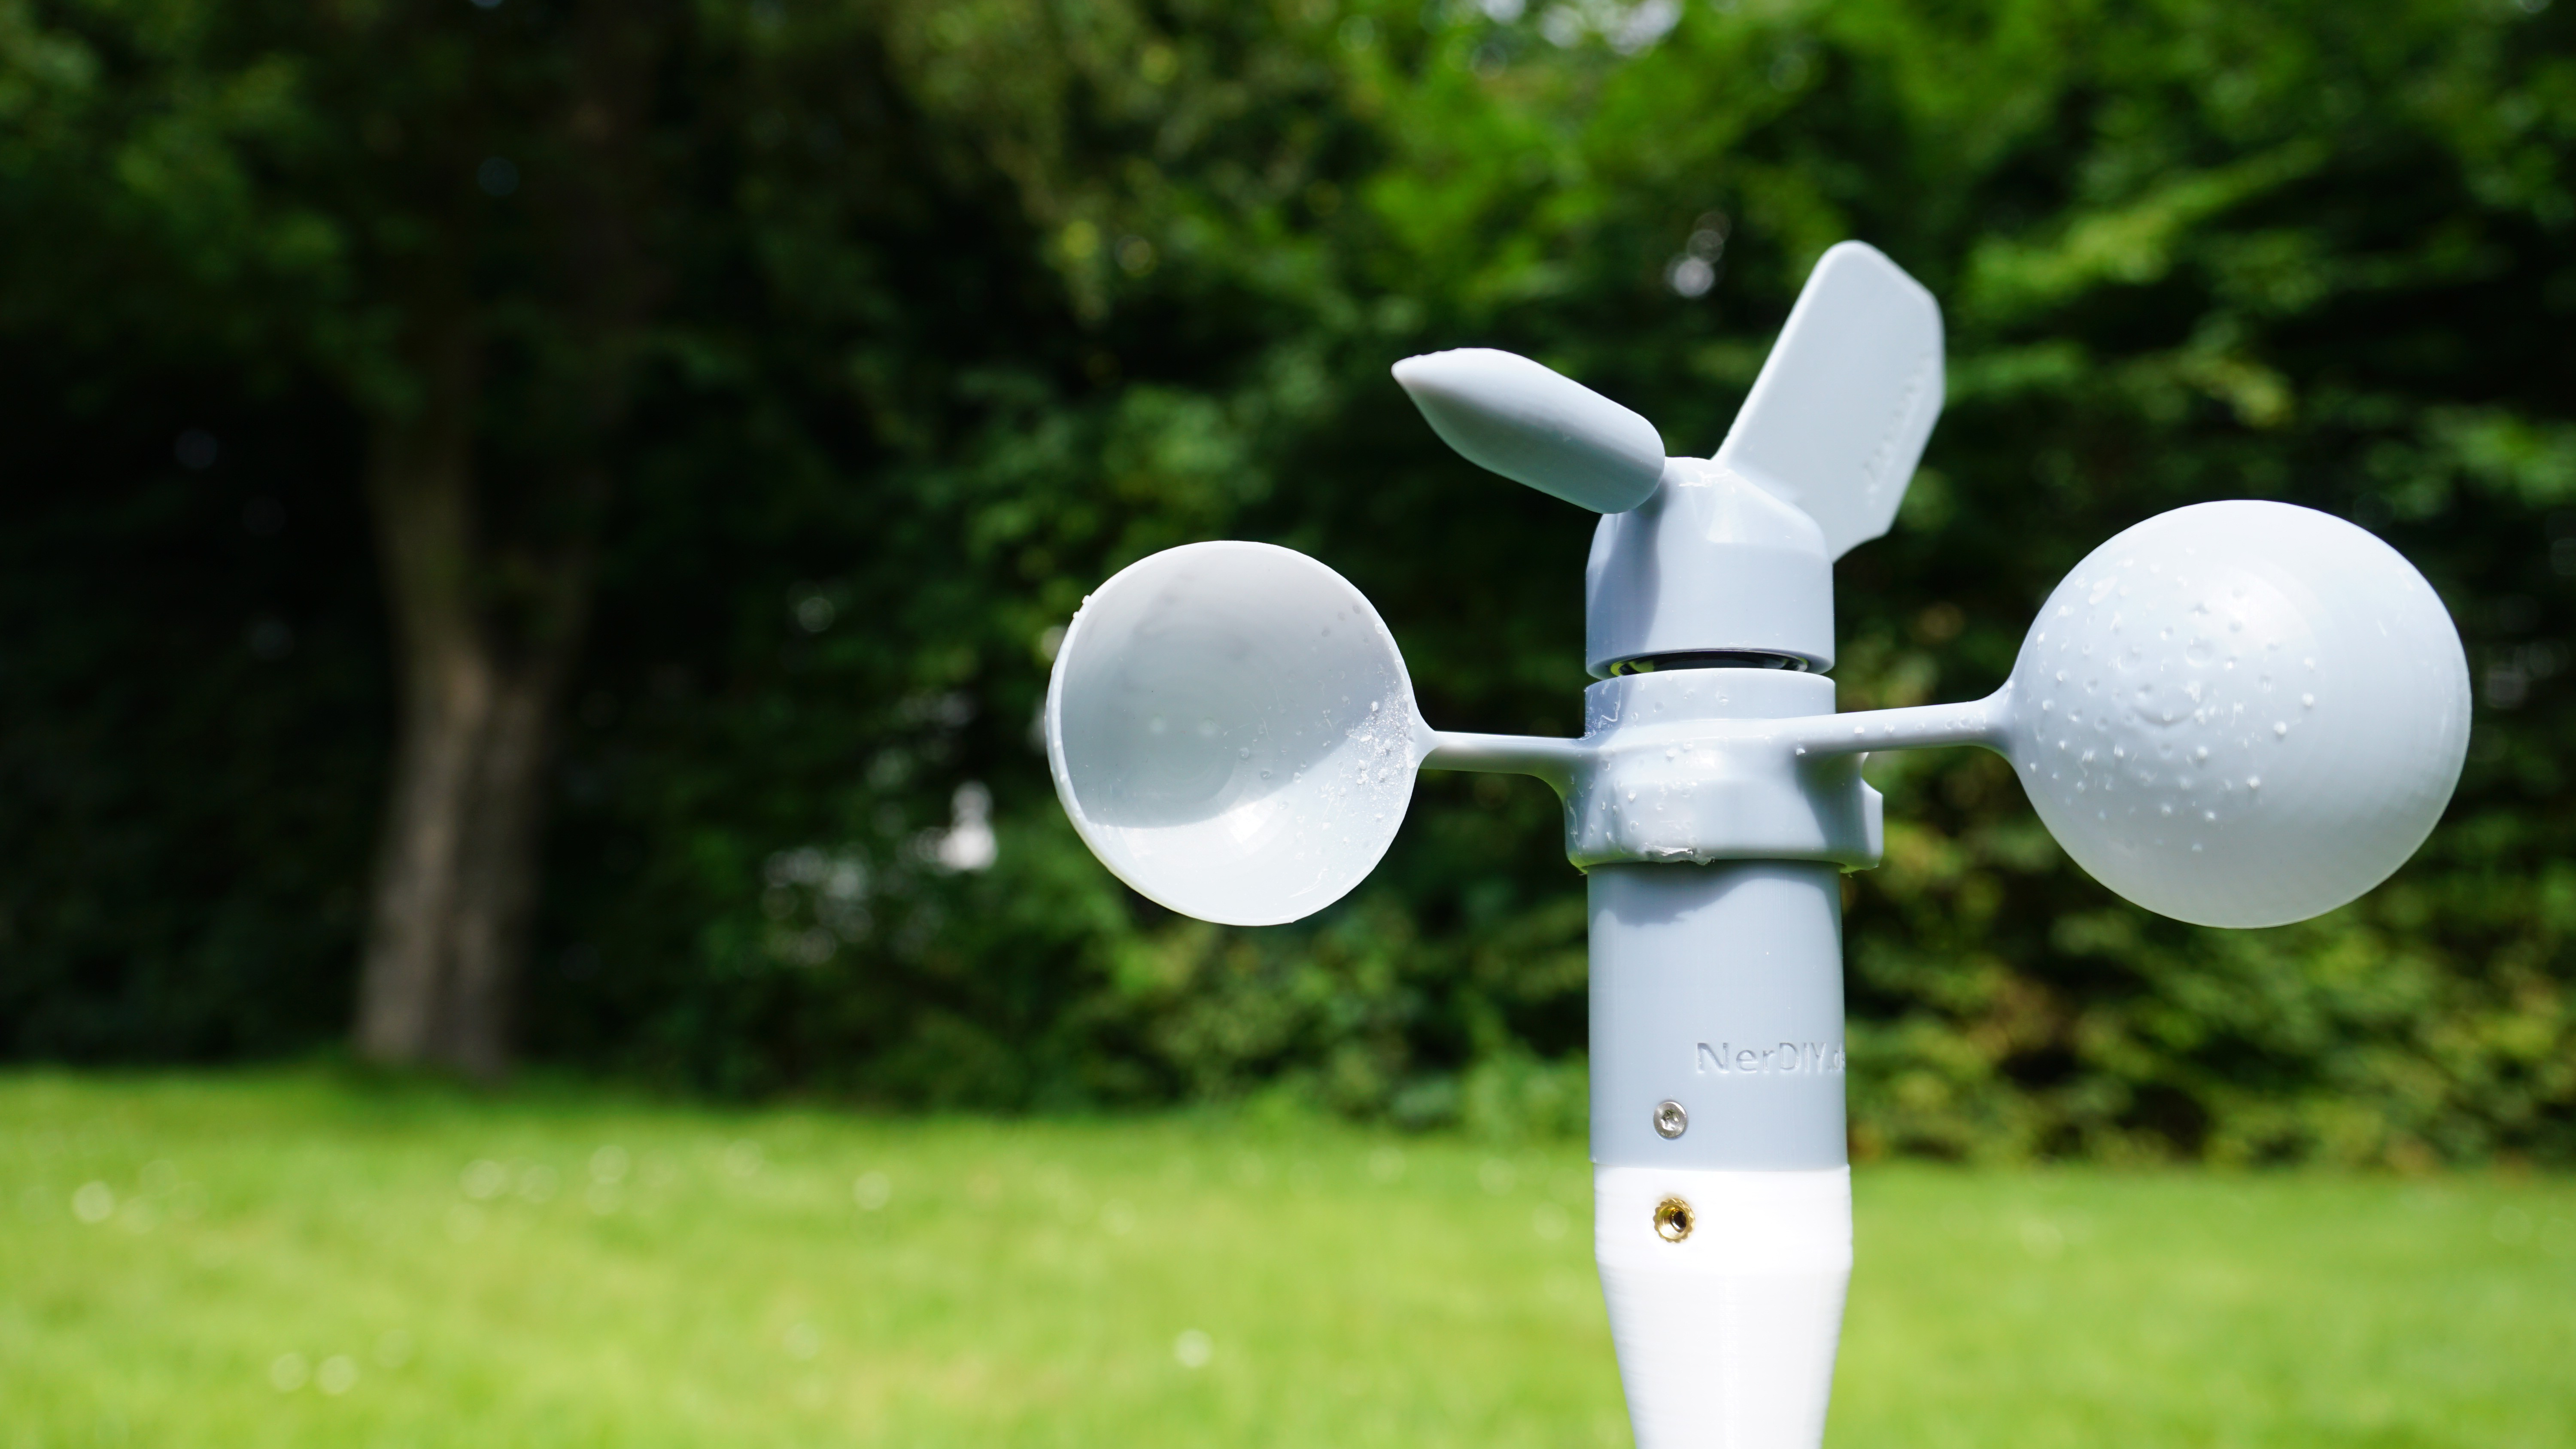 cup anemometer project